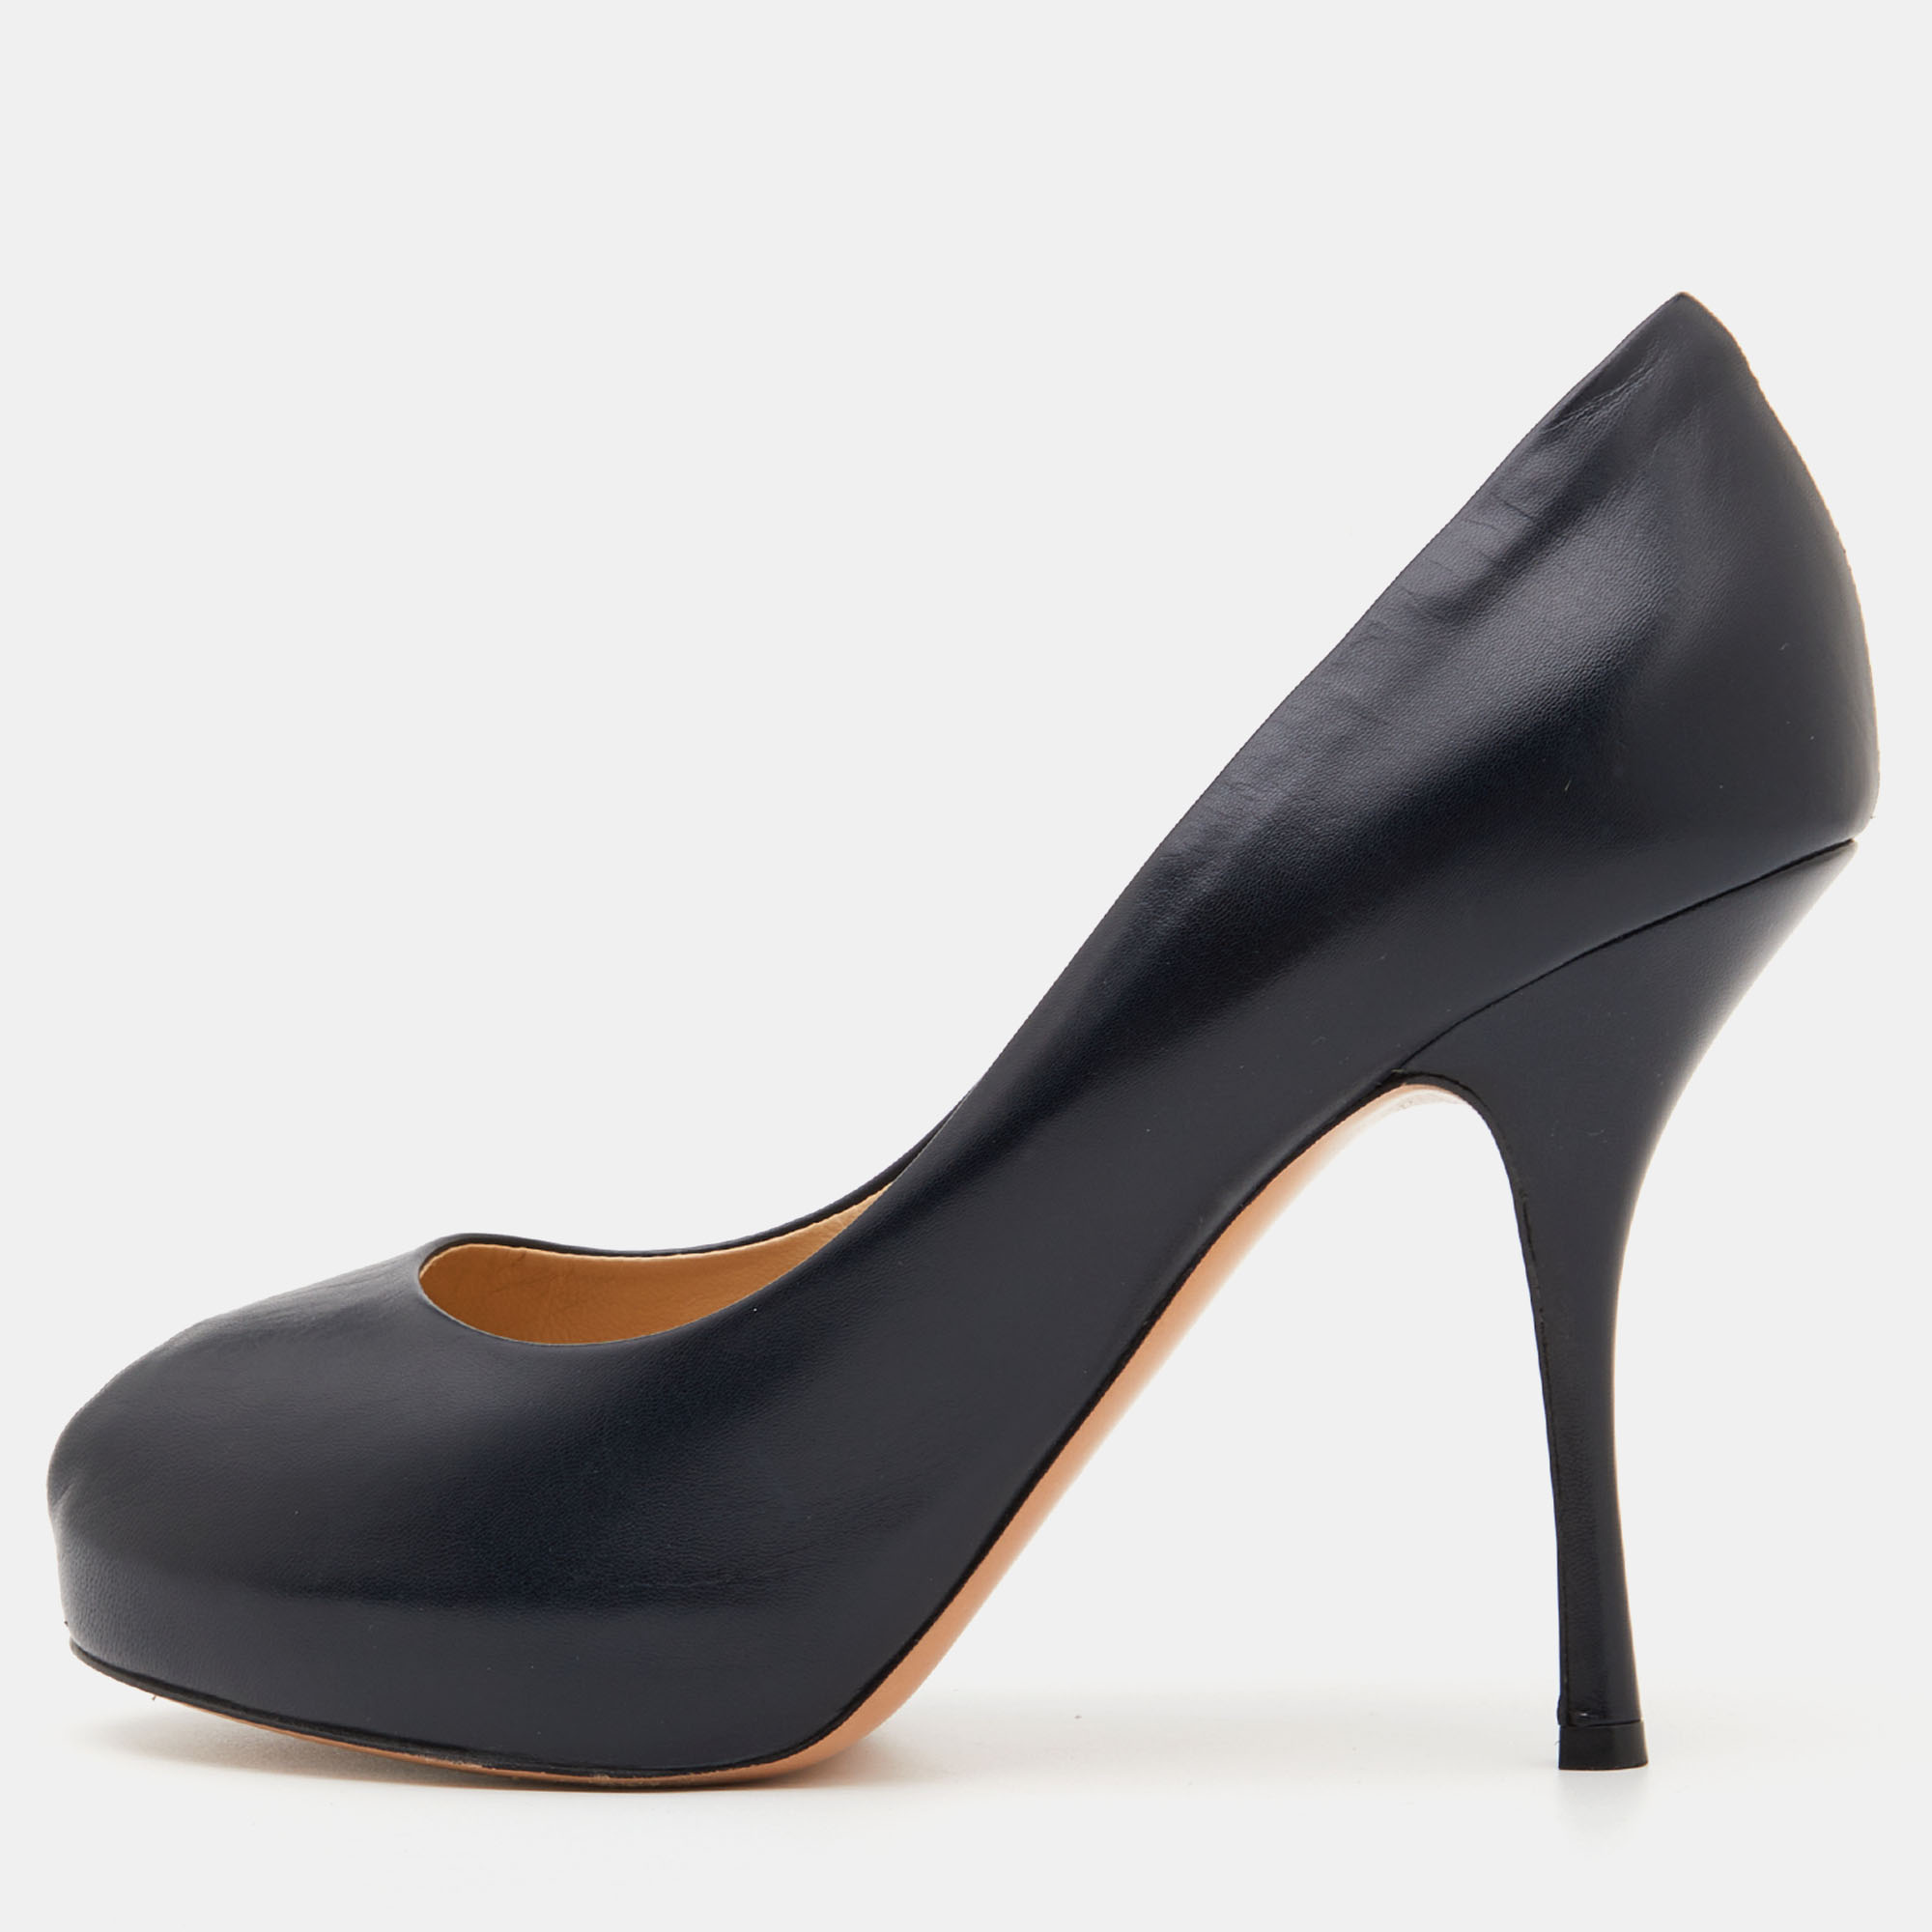 You can never go wrong with these stunning Giuseppe Zanotti pumps. Crafted in Italy they are made of leather in a shade of black and styled with peep toes 11 cm heels and low platforms.